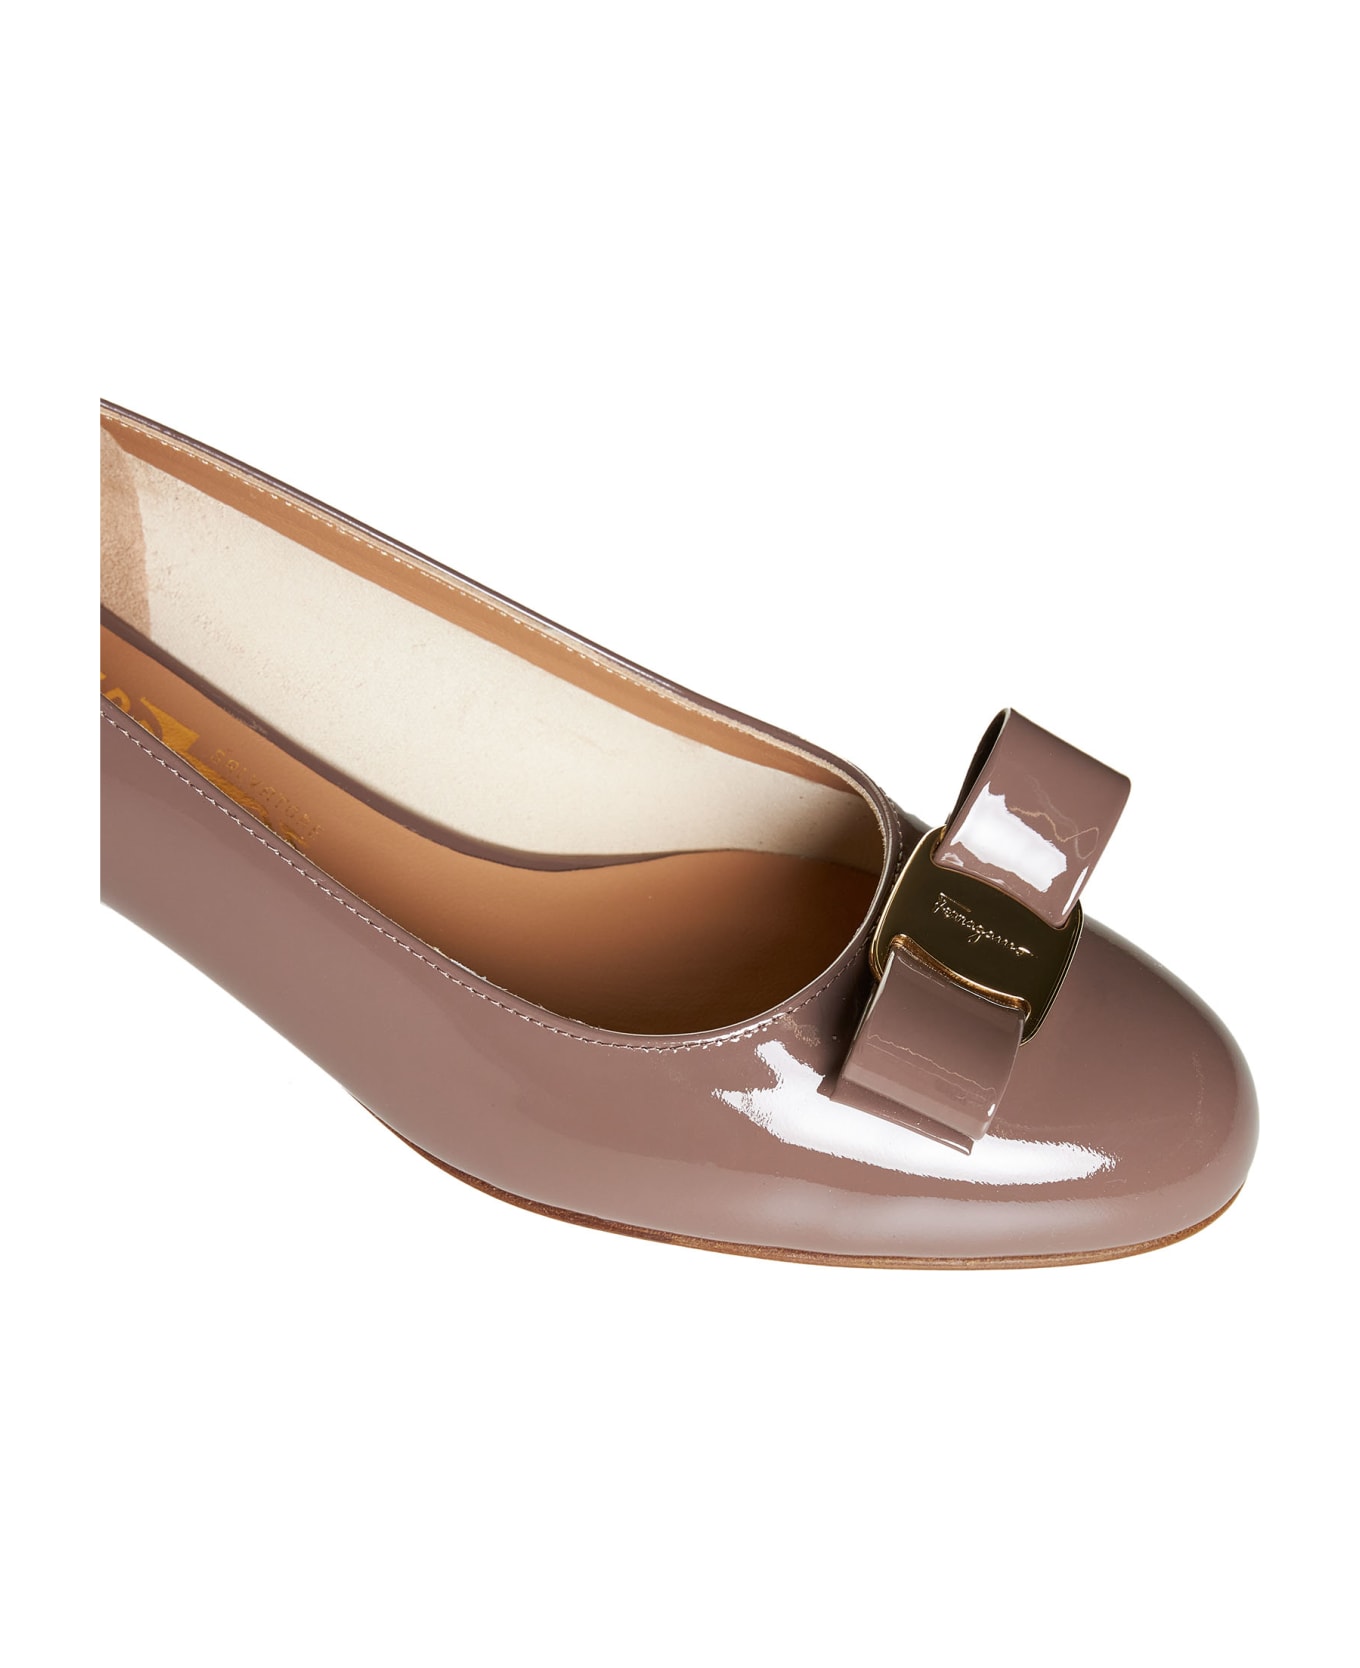 Ferragamo Bow-detailed Slip-on Pumps - Caraway seed